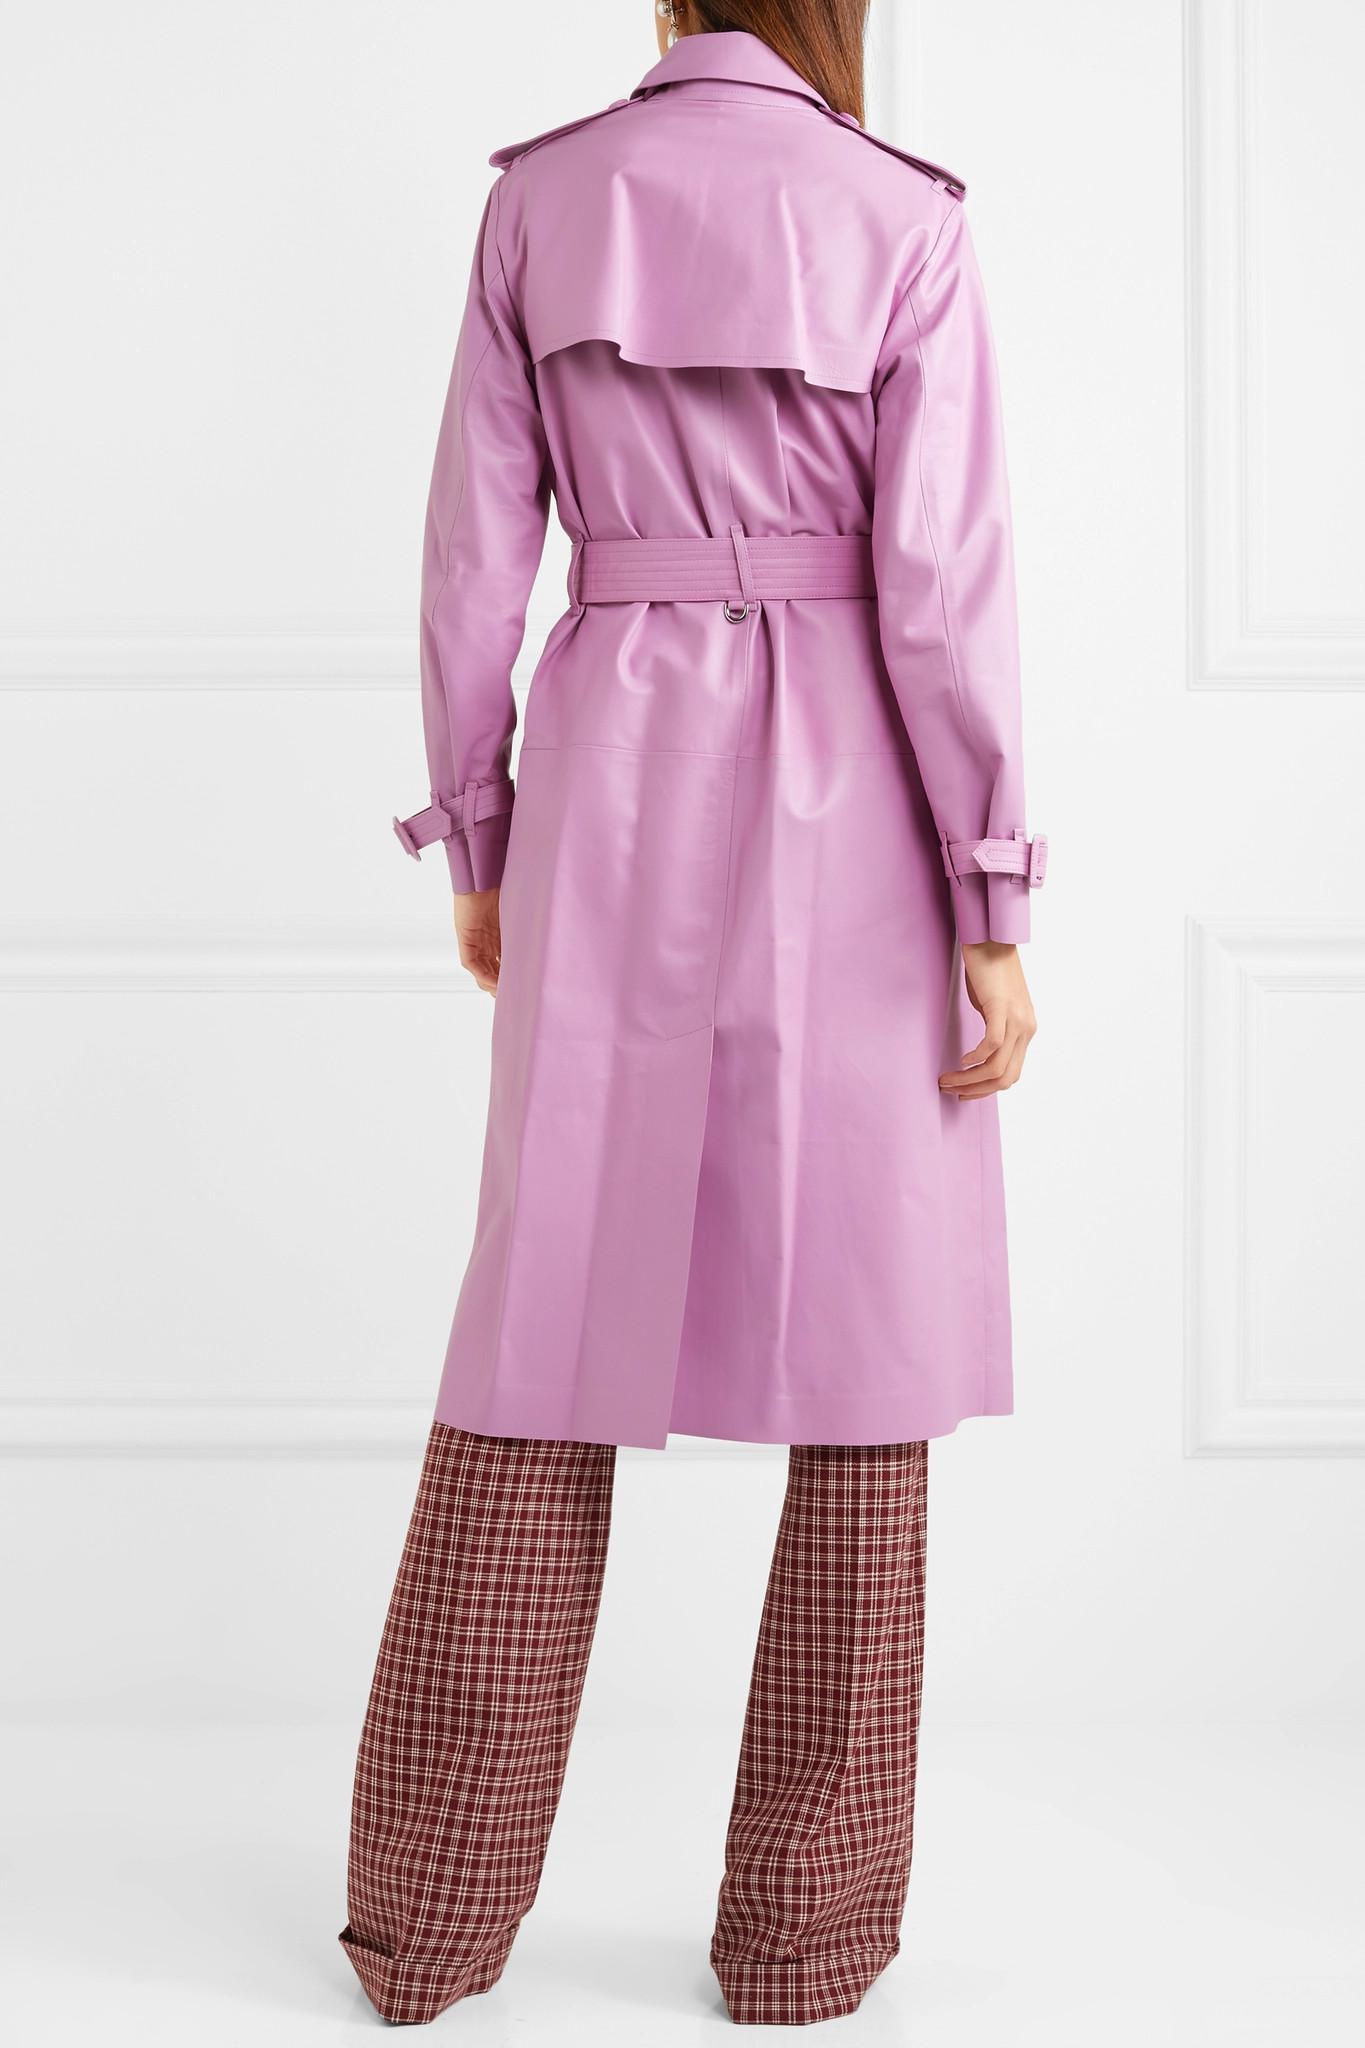 Lyst - Valentino Leather Trench Coat in Pink